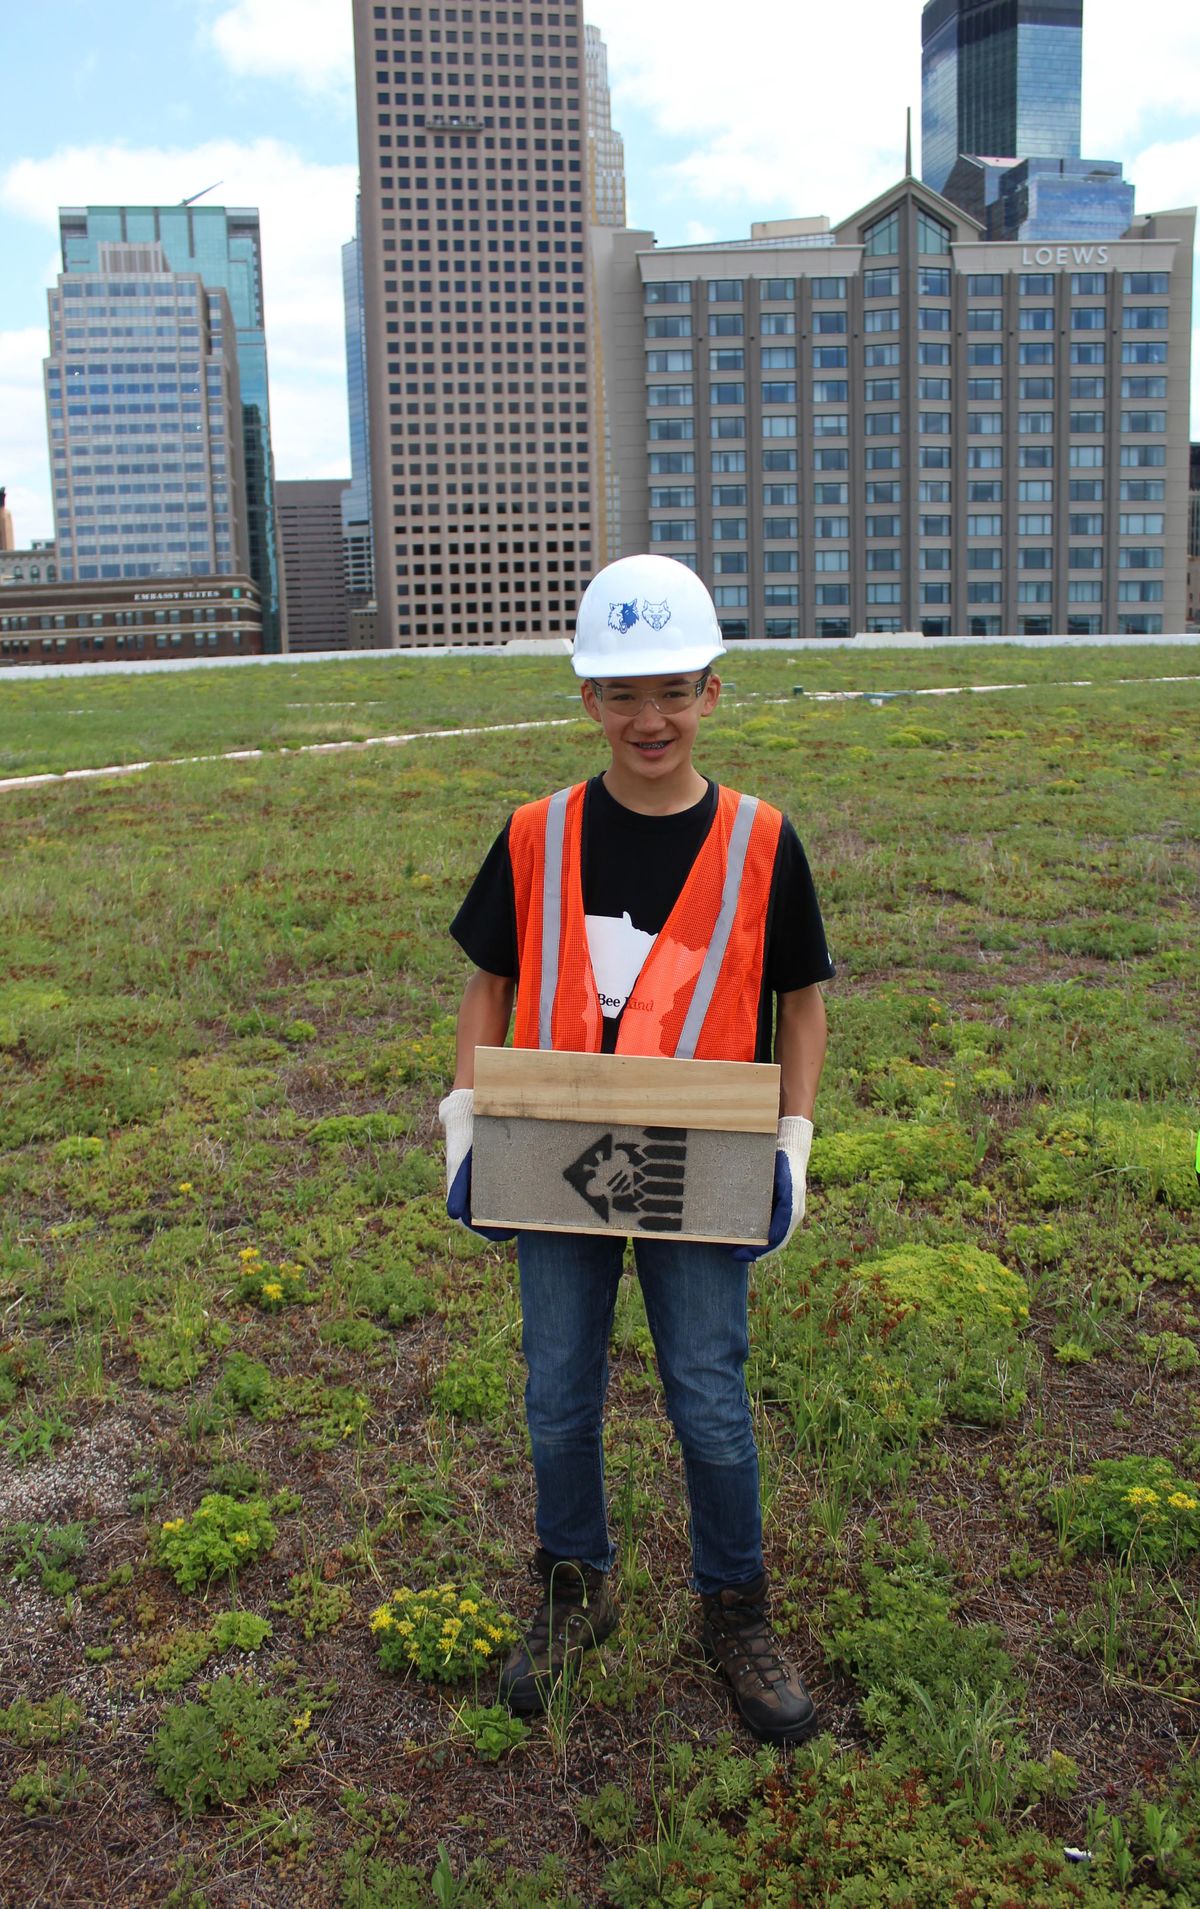 Bee Kind MN, Inc. founder Nikolas Liepins installs a native bee house on Target Center’s green roof.